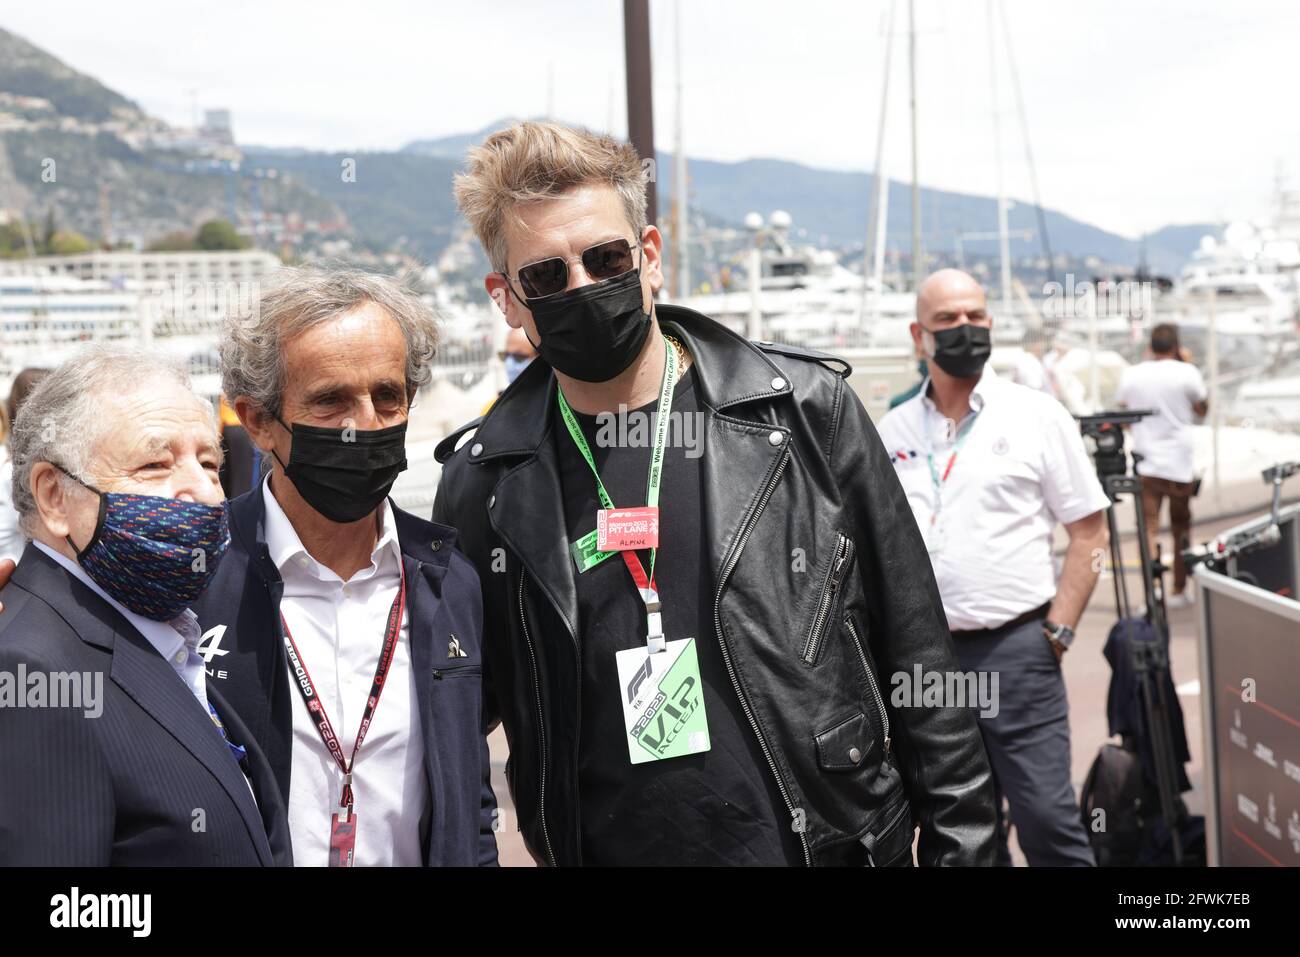 (L to R): Jean Todt (FRA) FIA President with Alain Prost (FRA) Alpine F1 Team Non-Executive Director and Benjamin Biolay (FRA) Singer. Monaco Grand Prix, Sunday 23rd May 2021. Monte Carlo, Monaco. Stock Photo